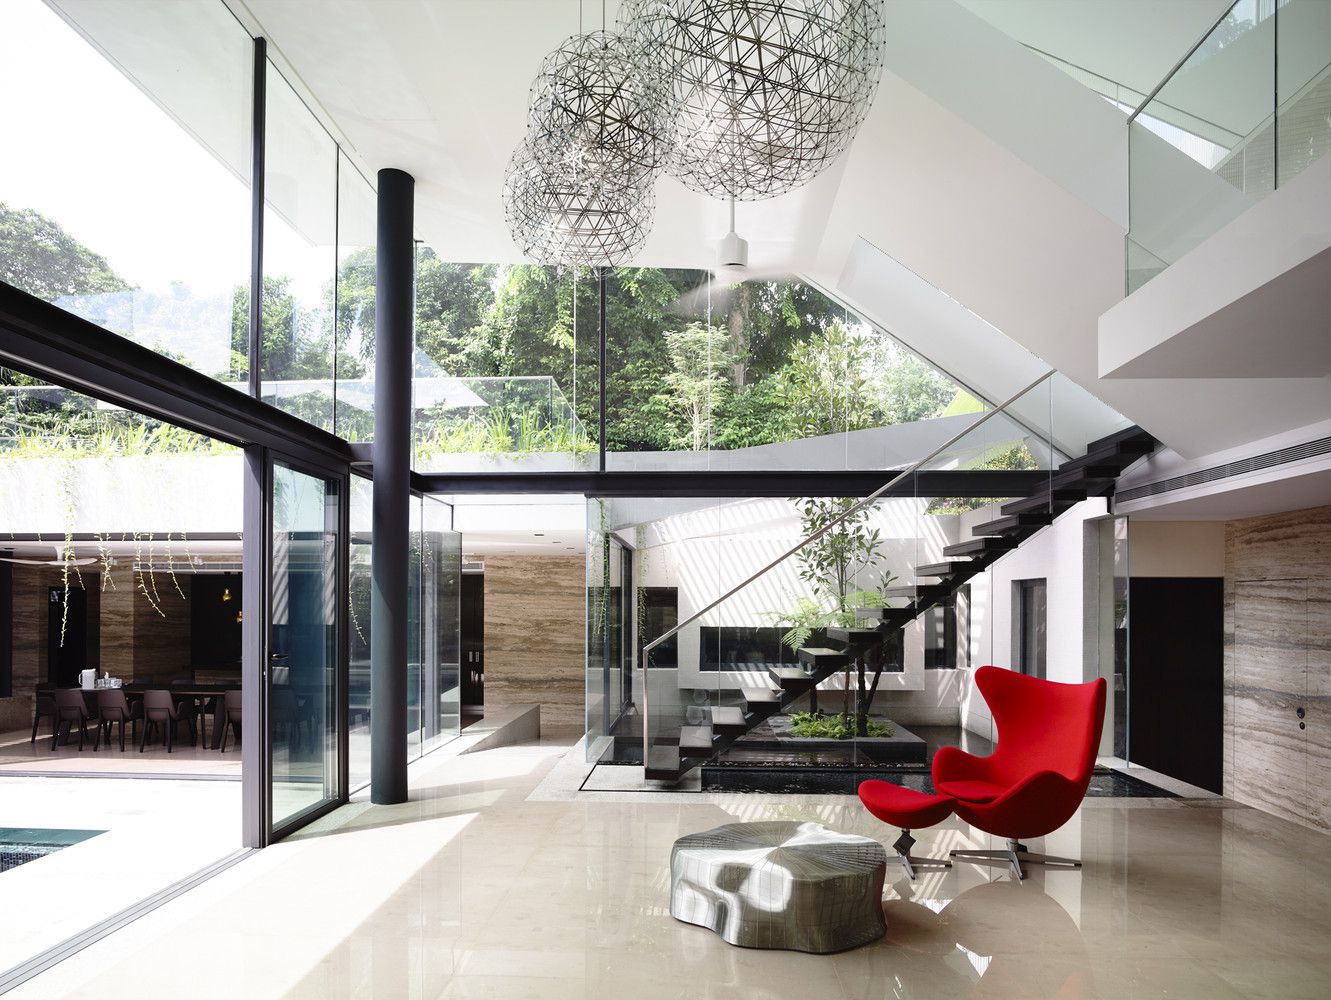 Andrew-Road-Contemporary-Residence-in-Singapore-by-A-D-LAB-11